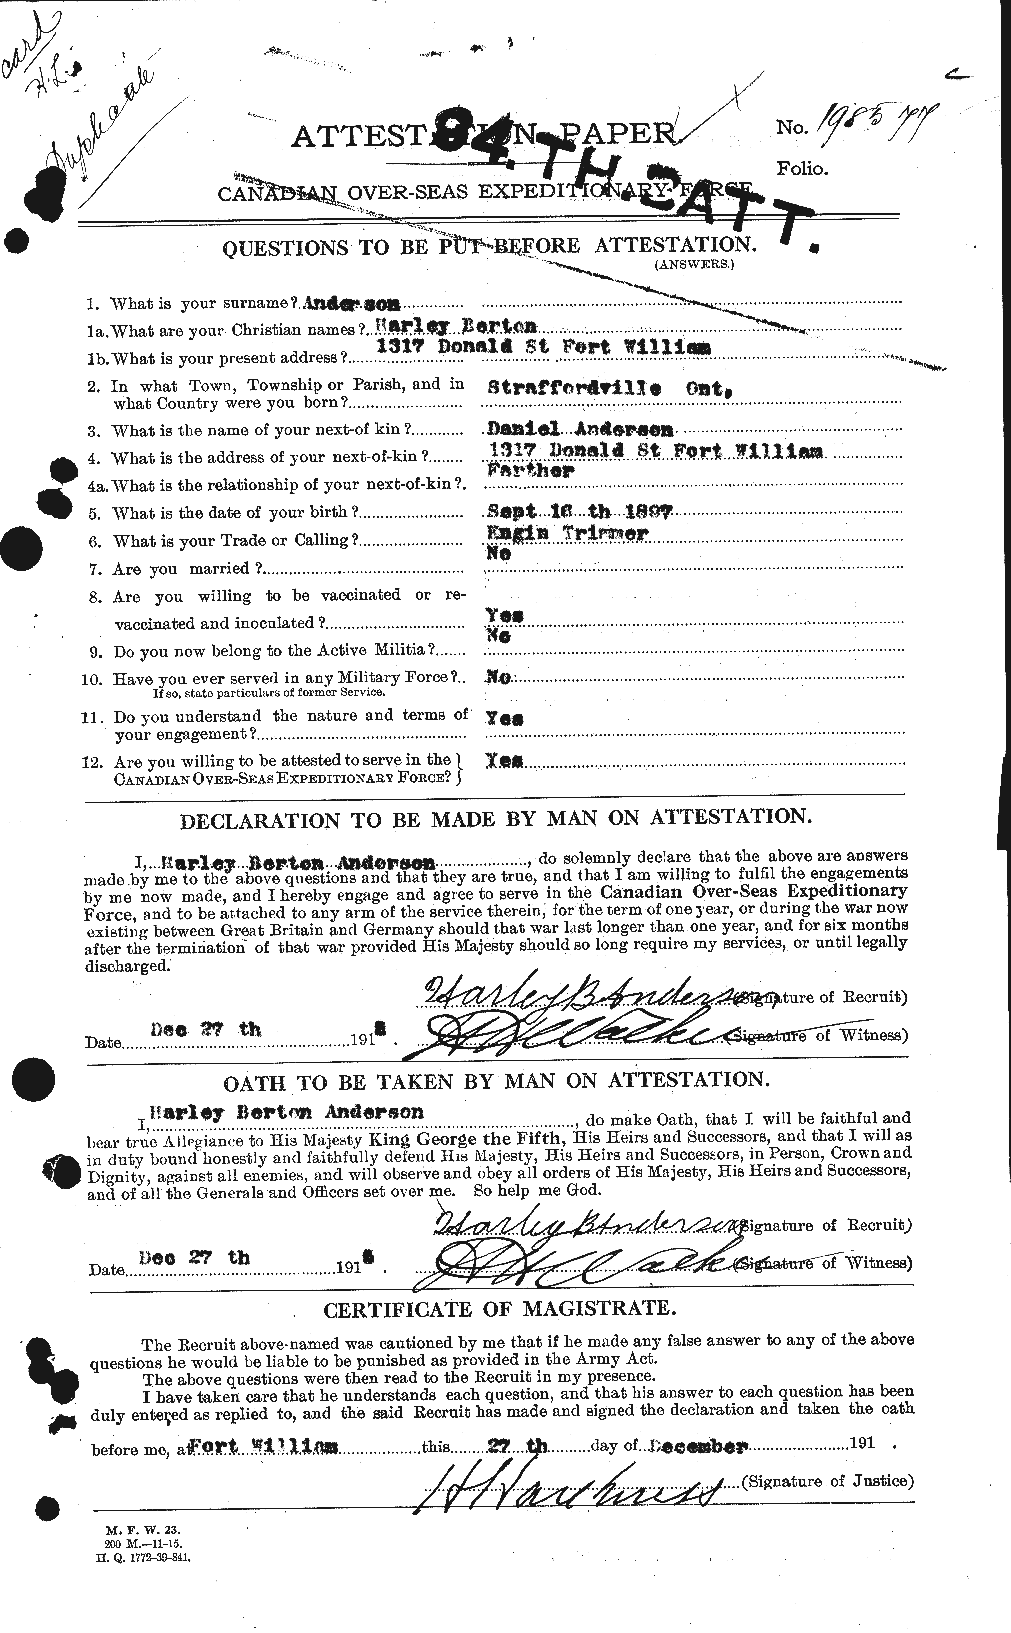 Personnel Records of the First World War - CEF 209630a